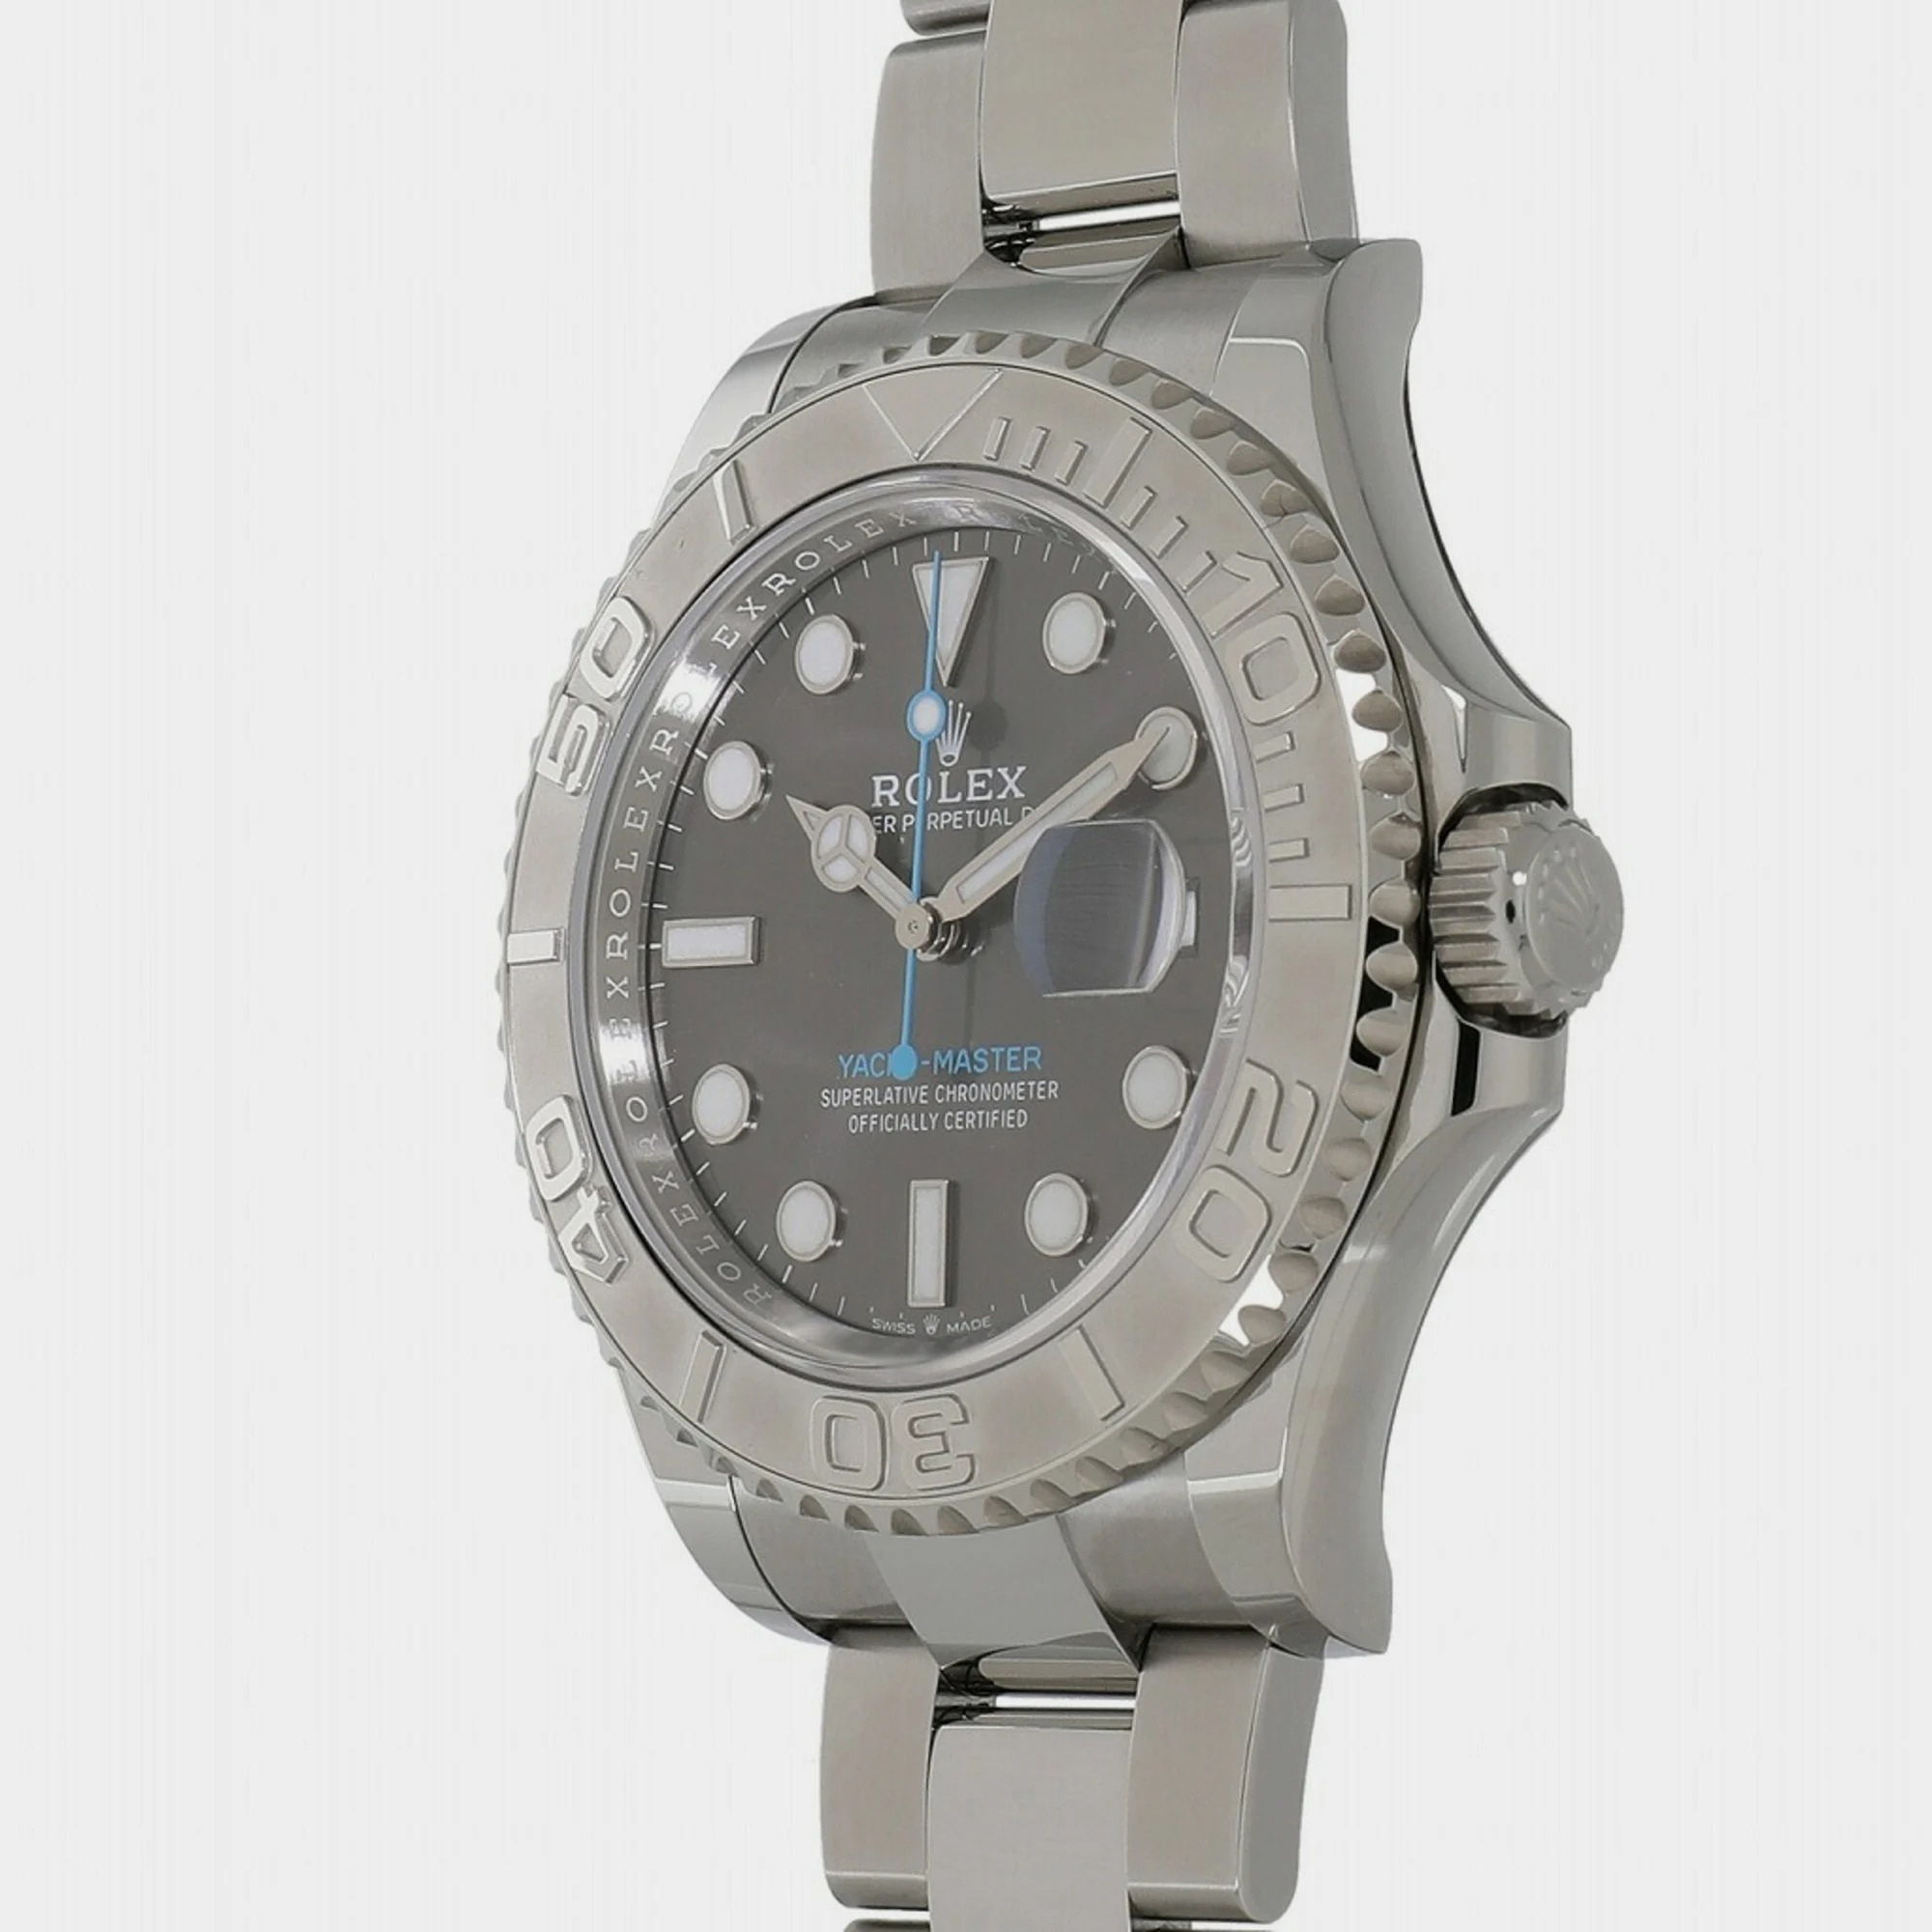 

Rolex Grey Platinum And Stainless Steel Yacht-Master 126622 Automatic Men's Wristwatch 40 mm